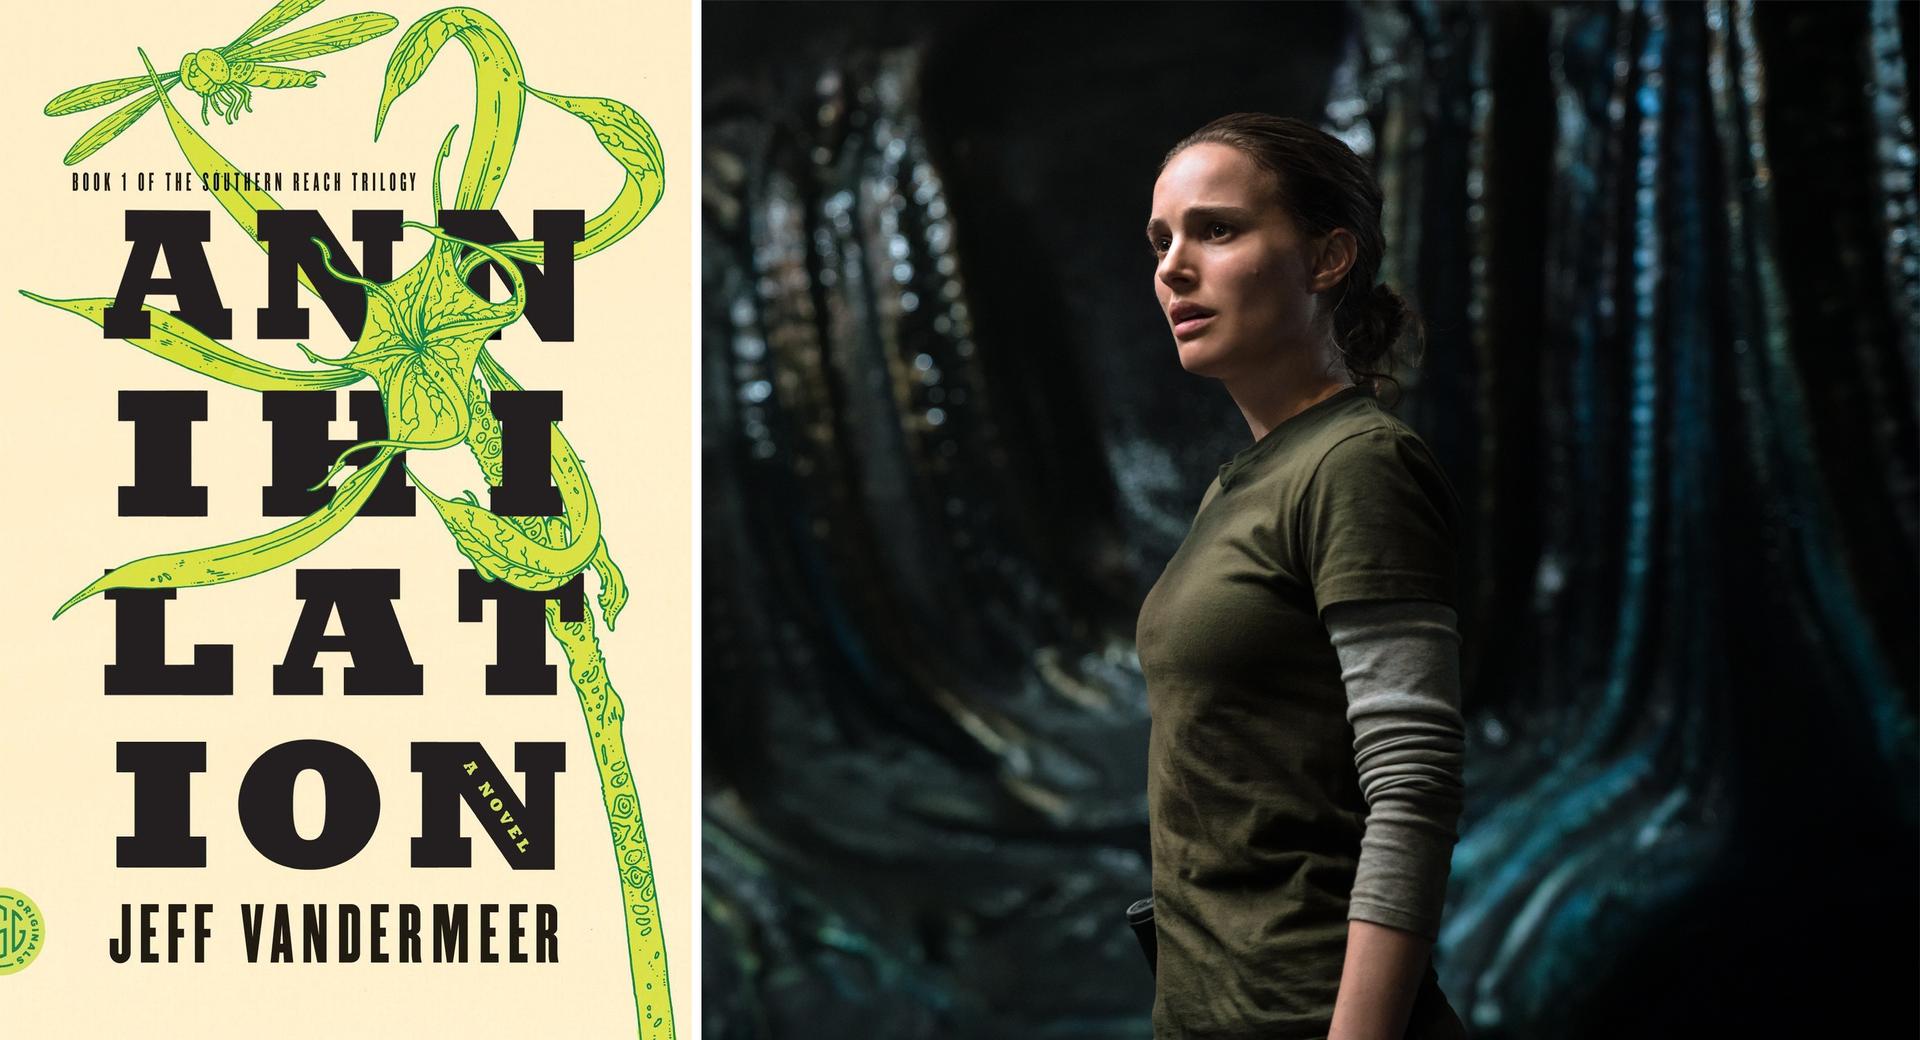 The book cover and a movie still from “Annihilation.”